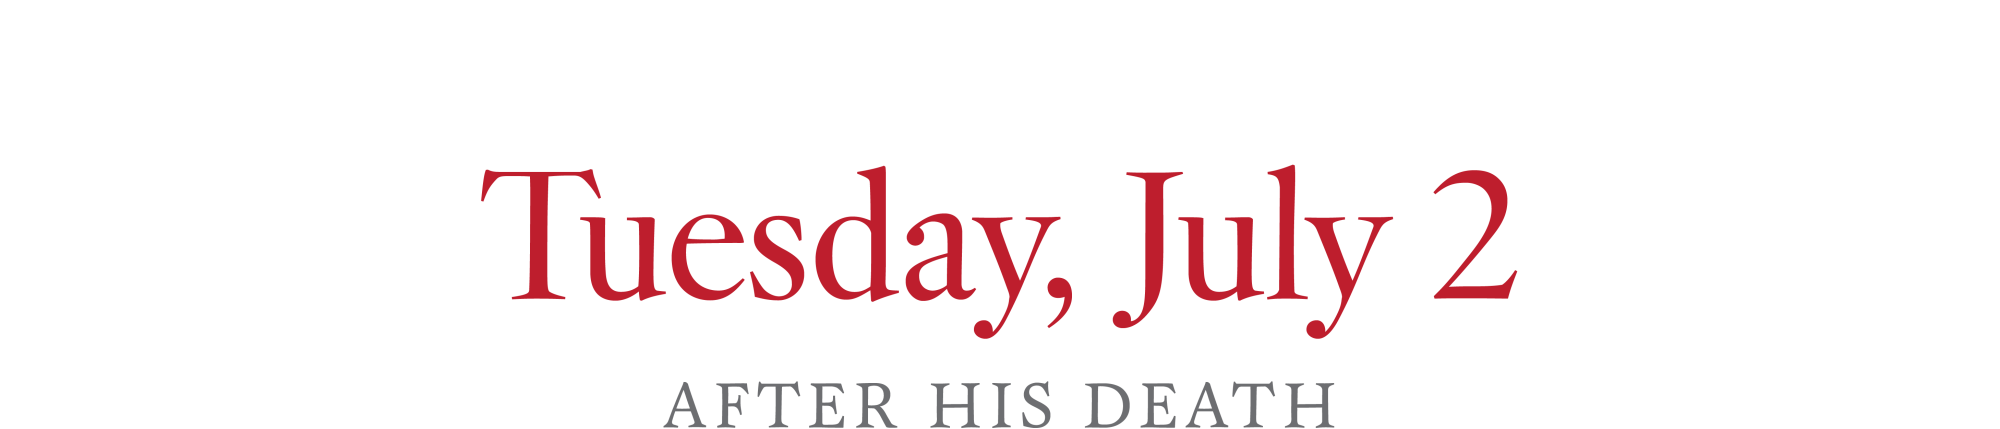 Tuesday, July 2. After his death.